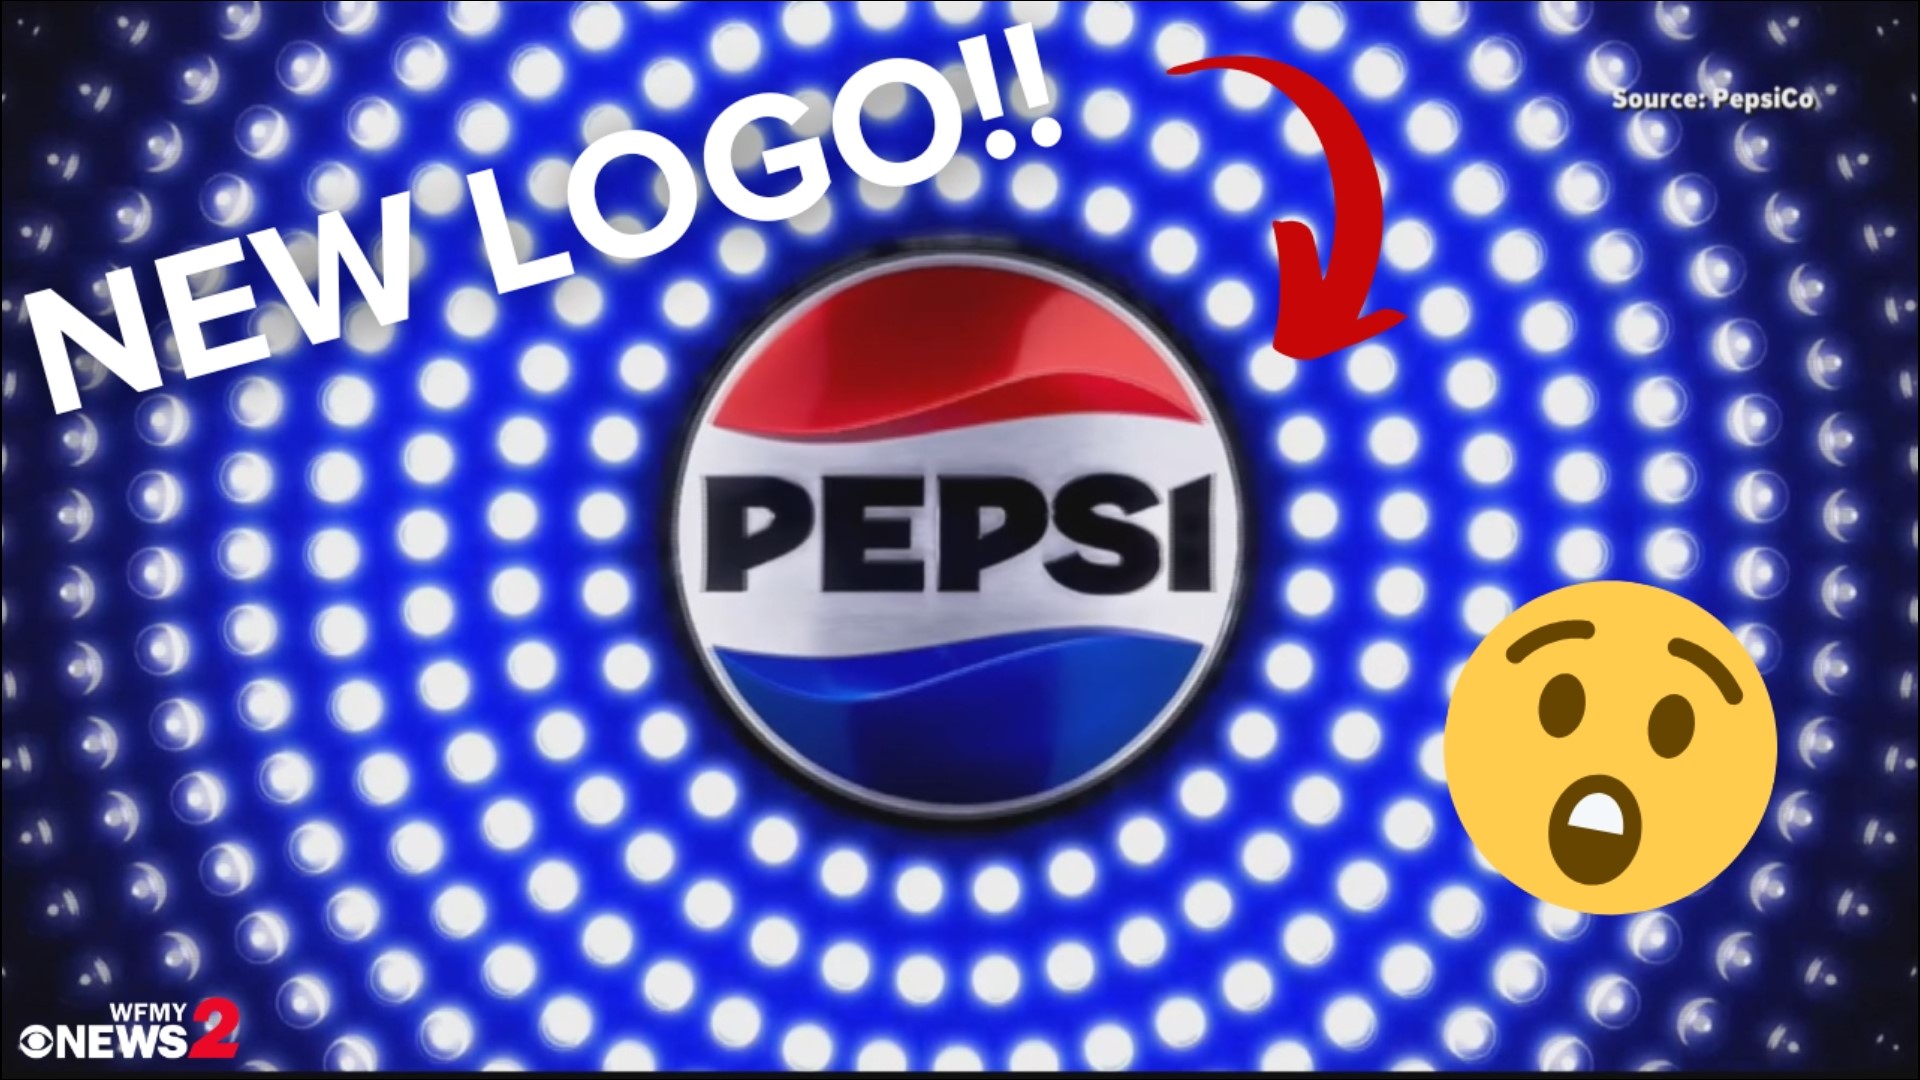 2 Wants To Know dives into the fun facts about Pepsi that you probably didn't know as they change their logo for the first time in over 10 years.